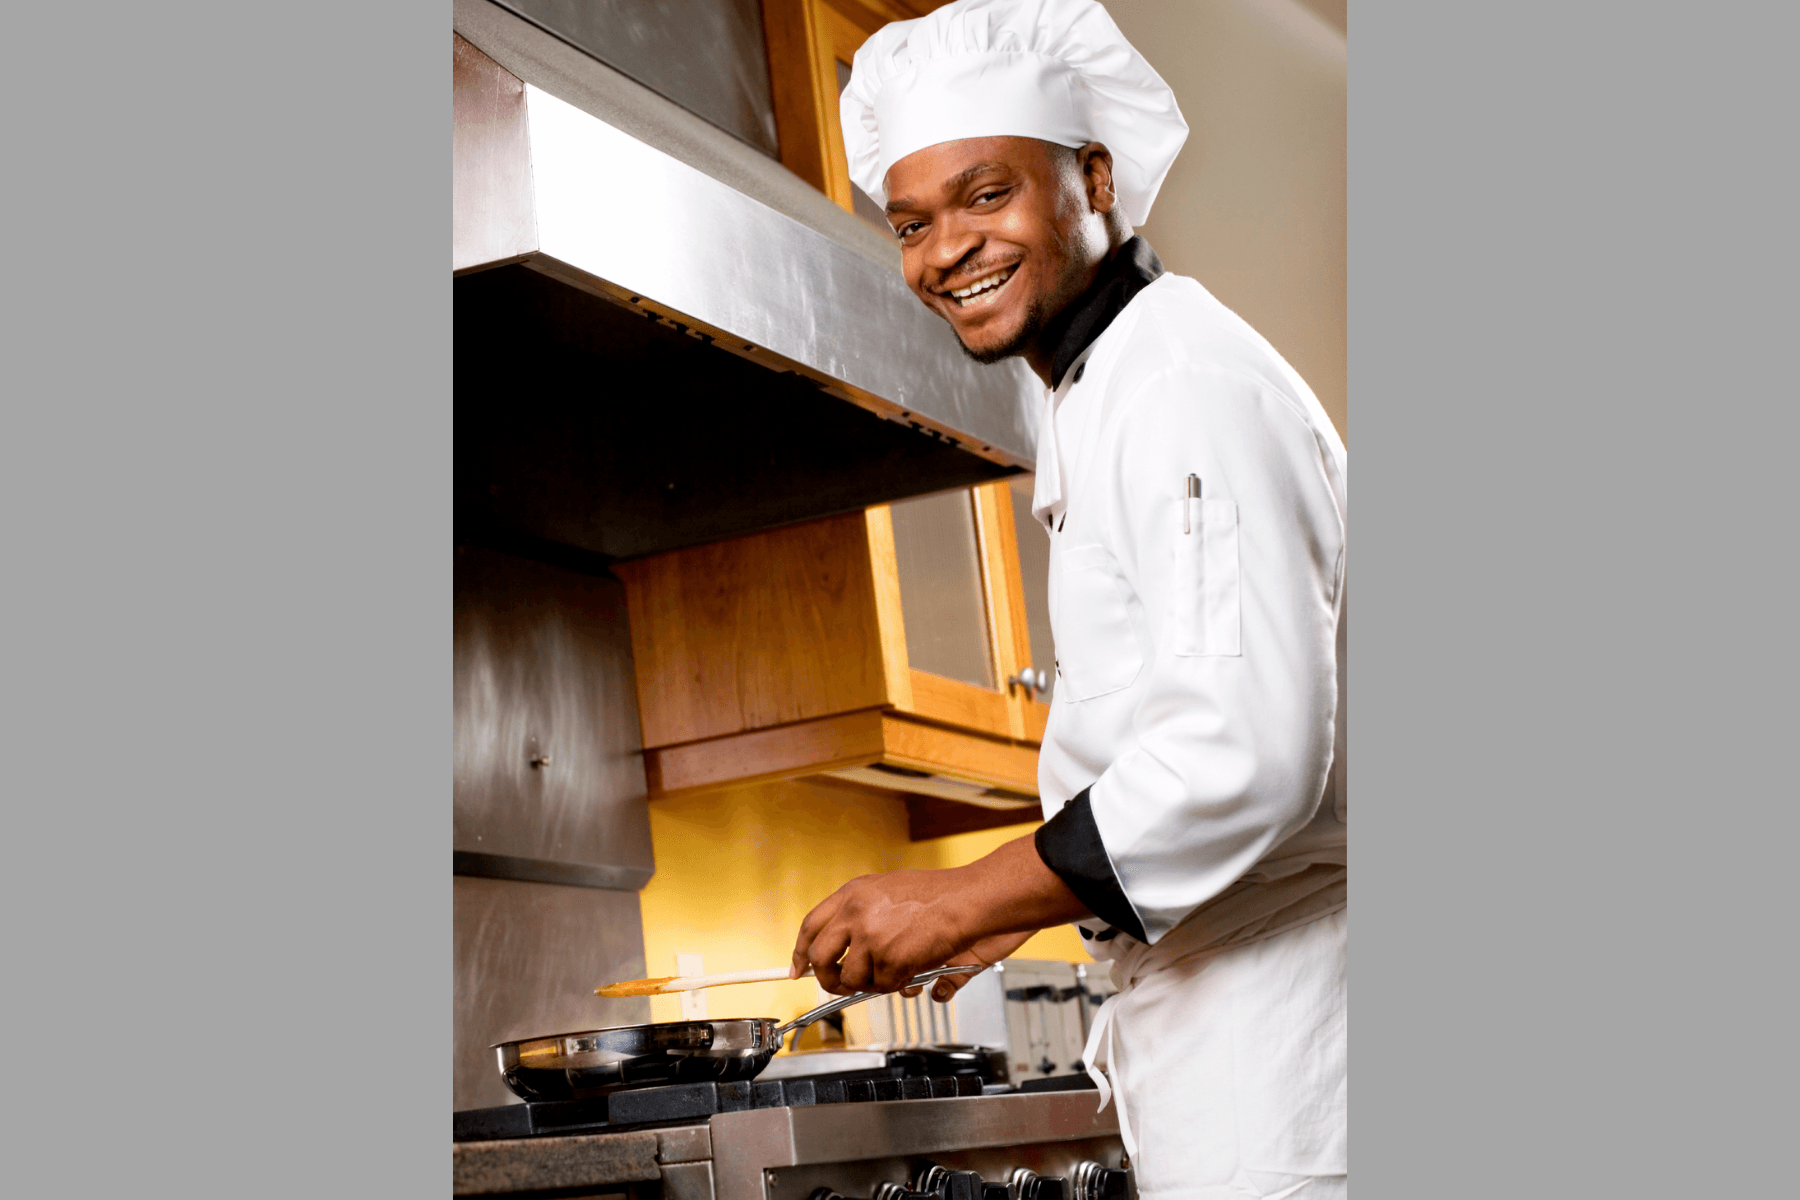 Chef cooking on natural gas range